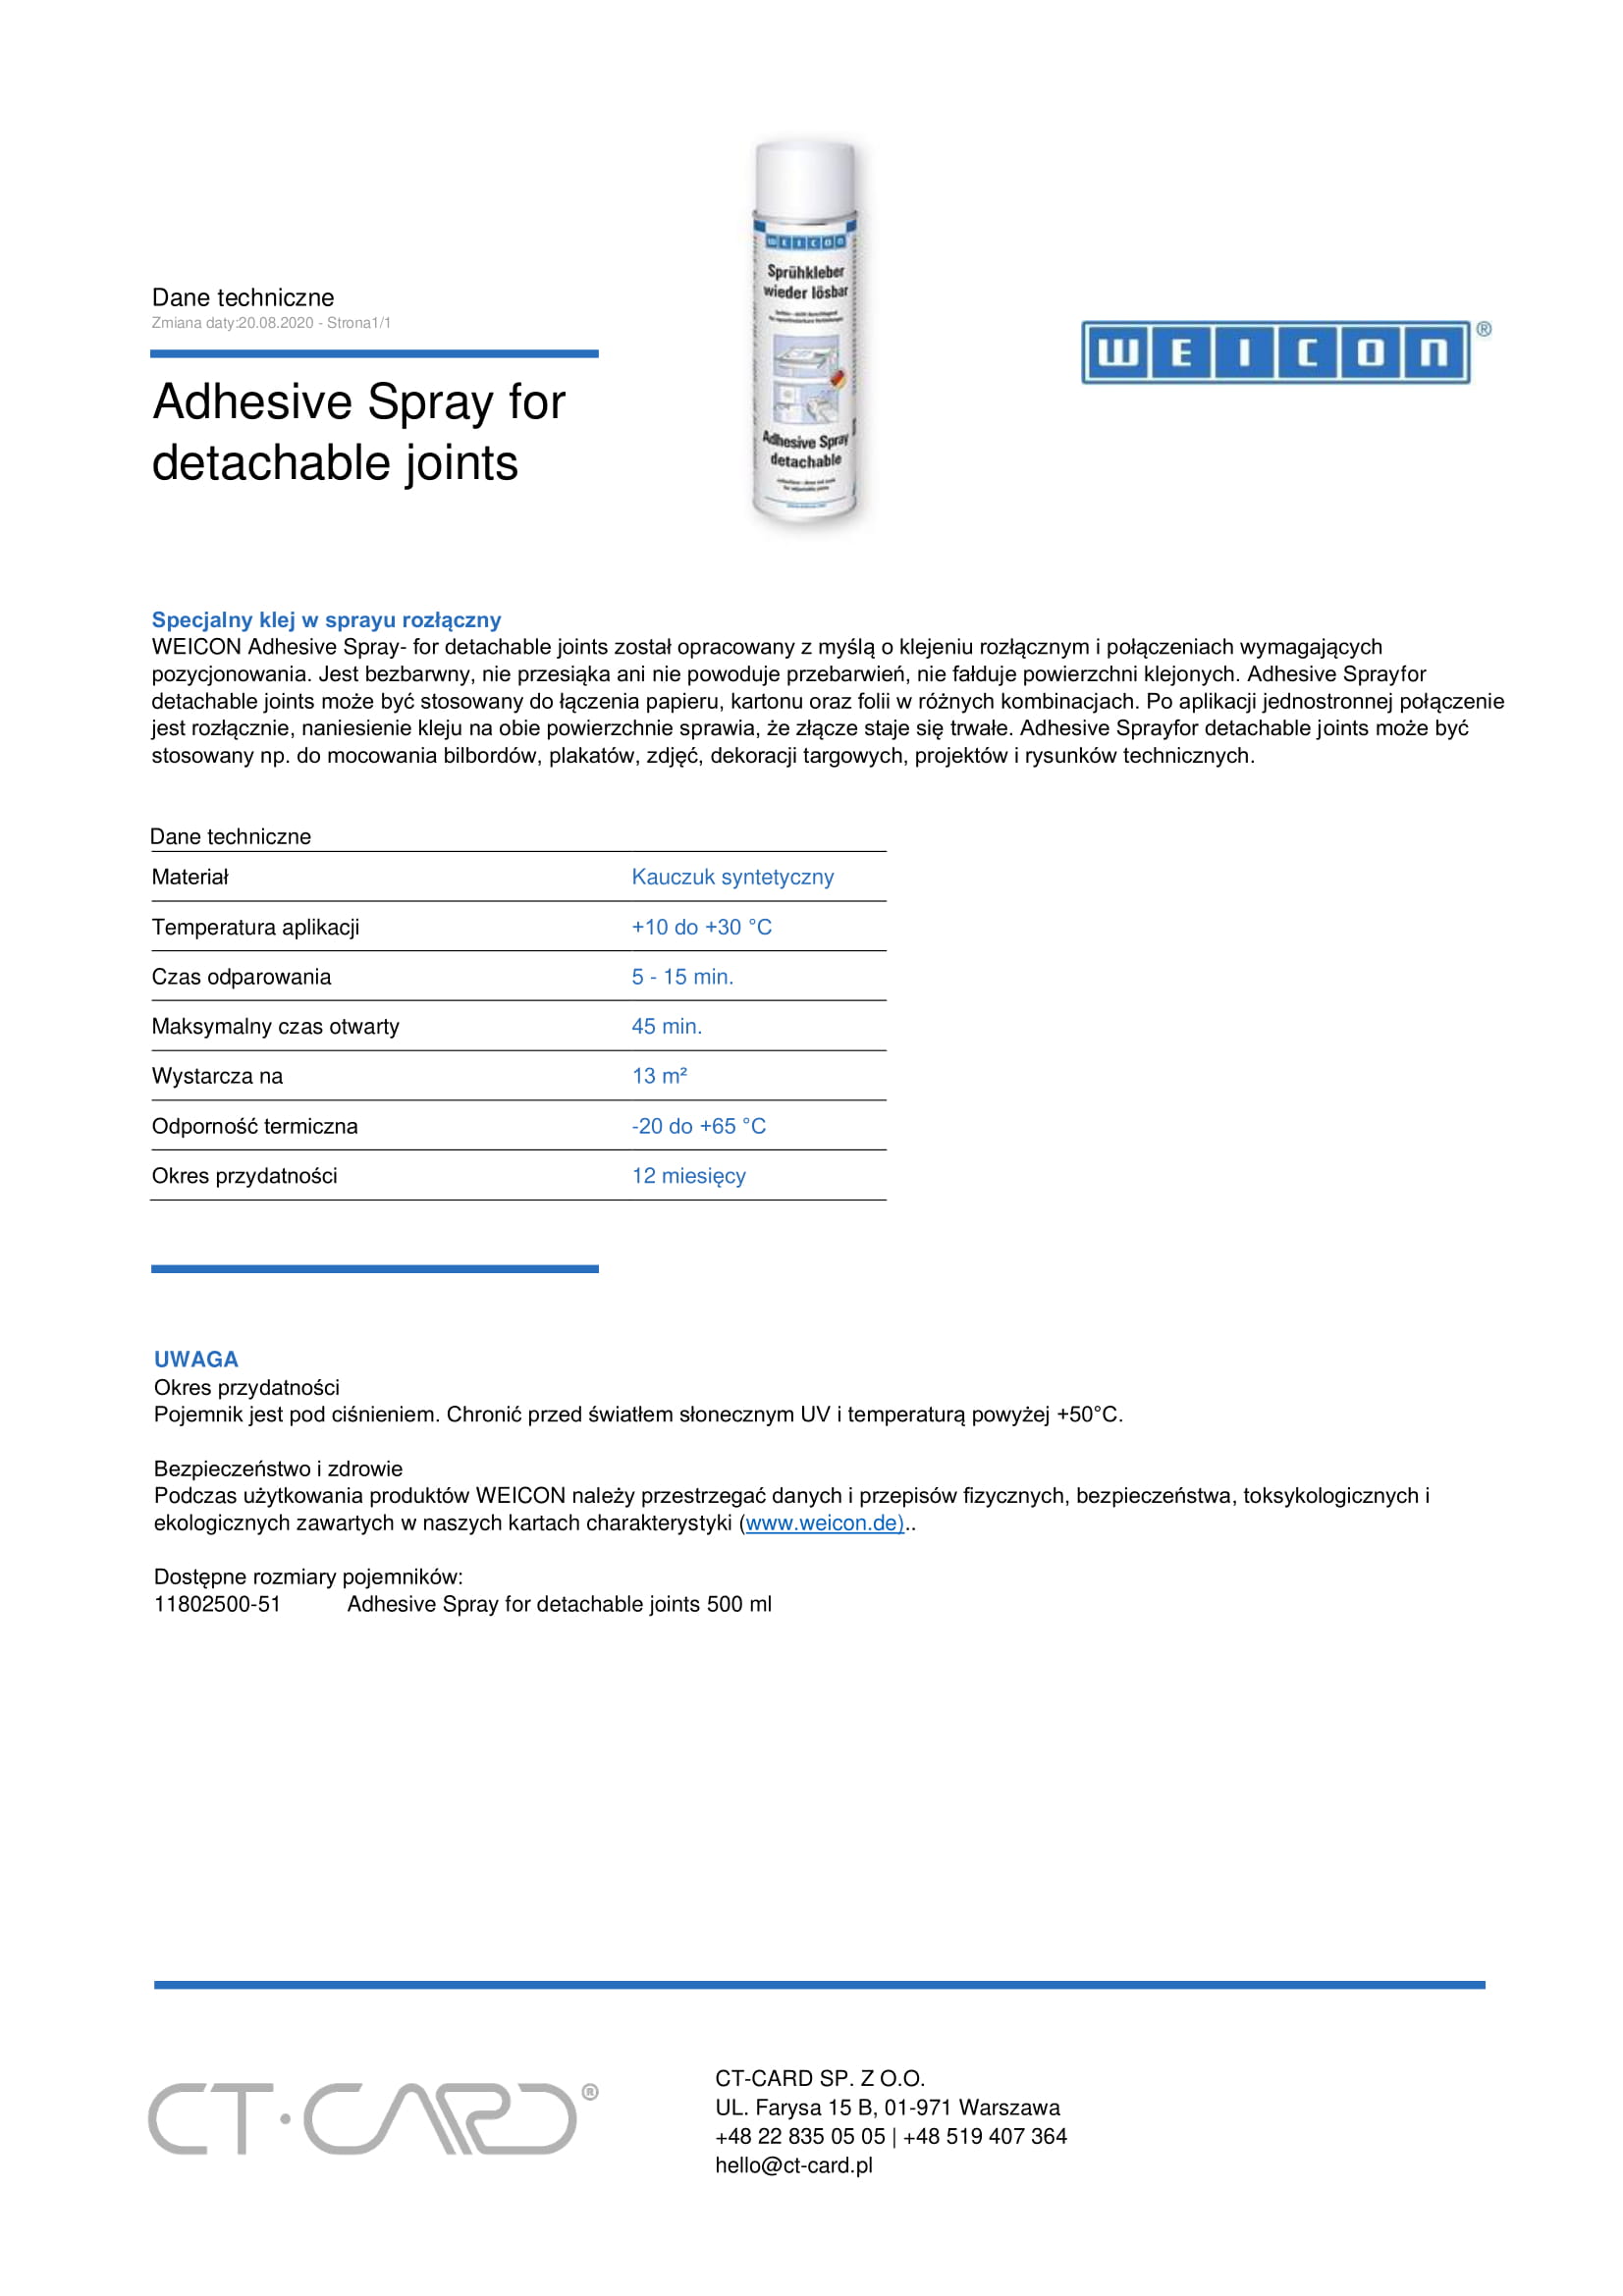 Adhesive Spray for detachable joints-1